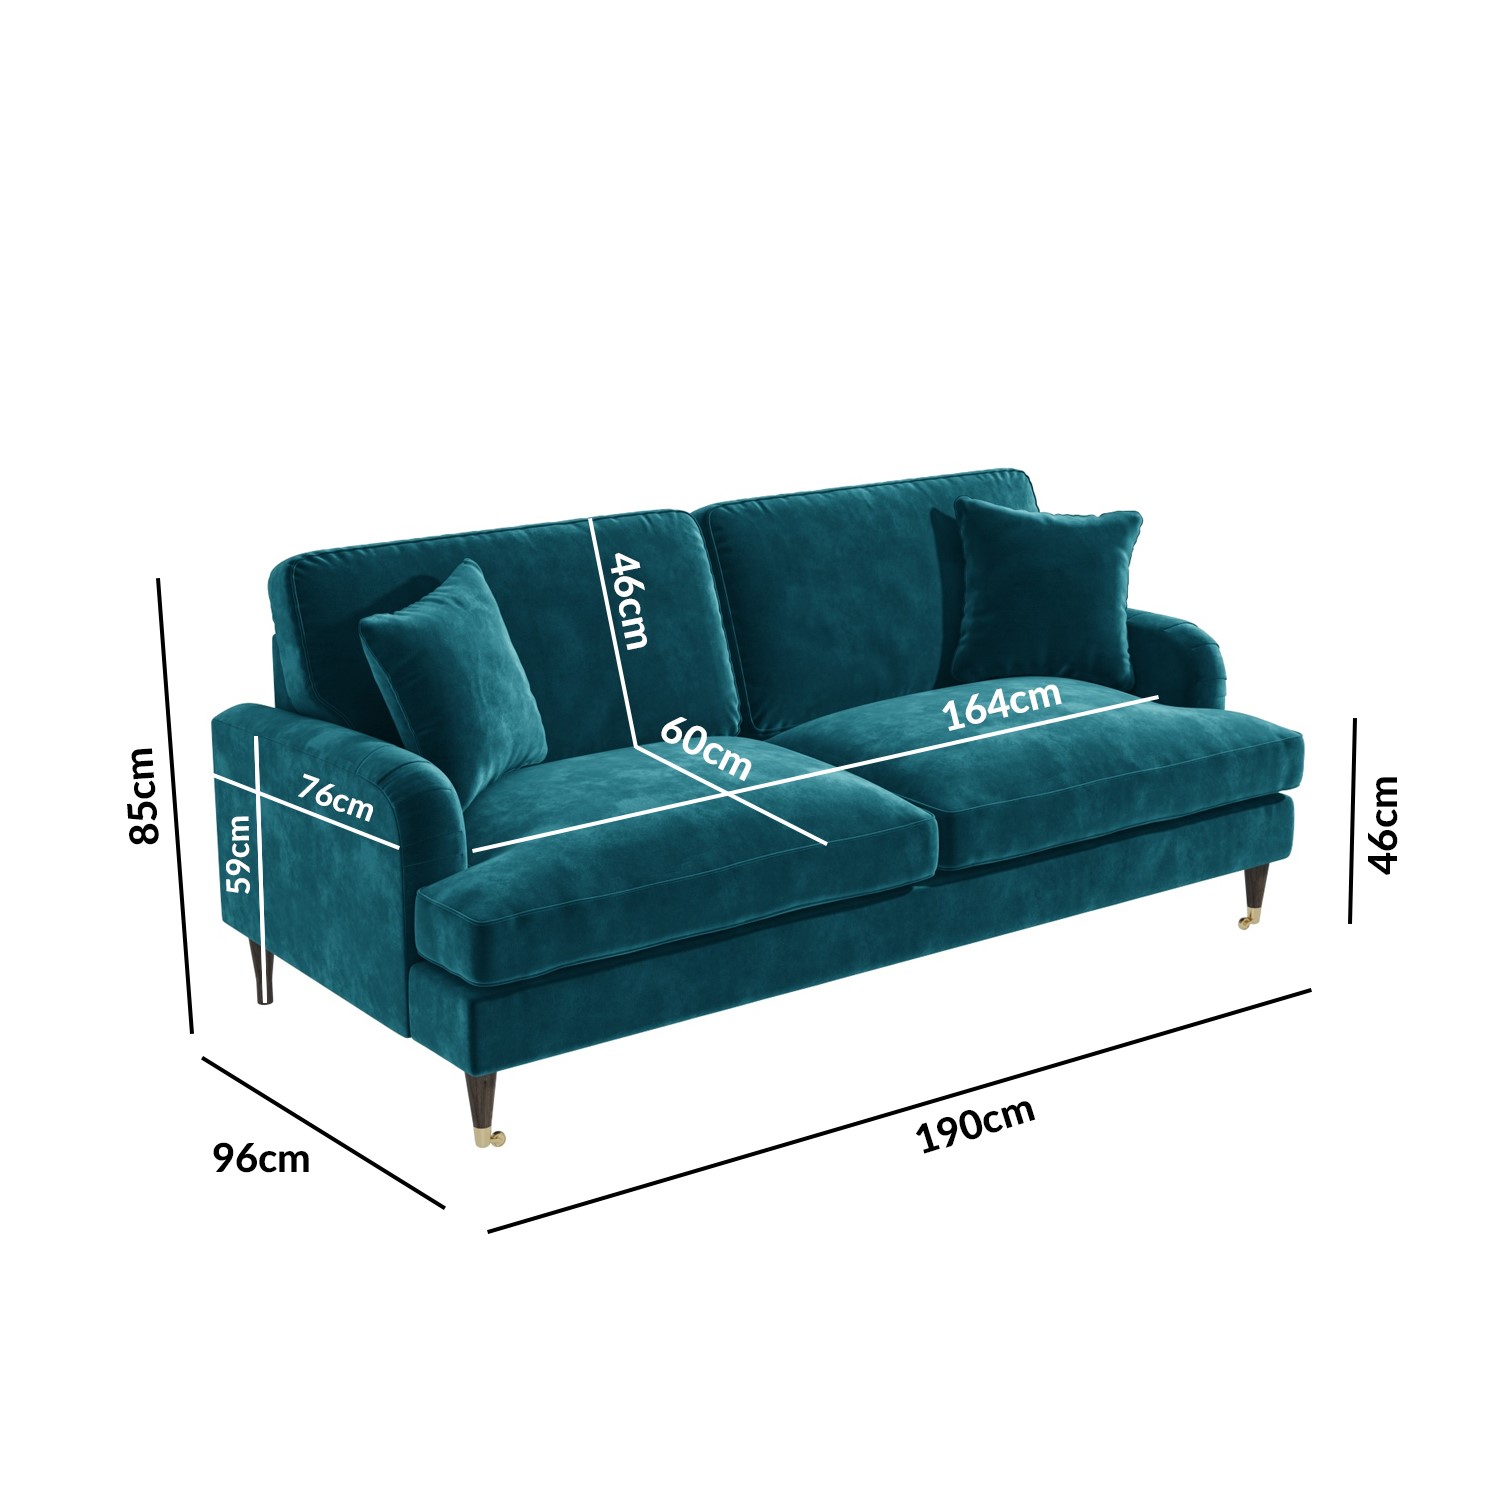 Read more about Teal velvet 3 seater & 2 seater sofa set payton